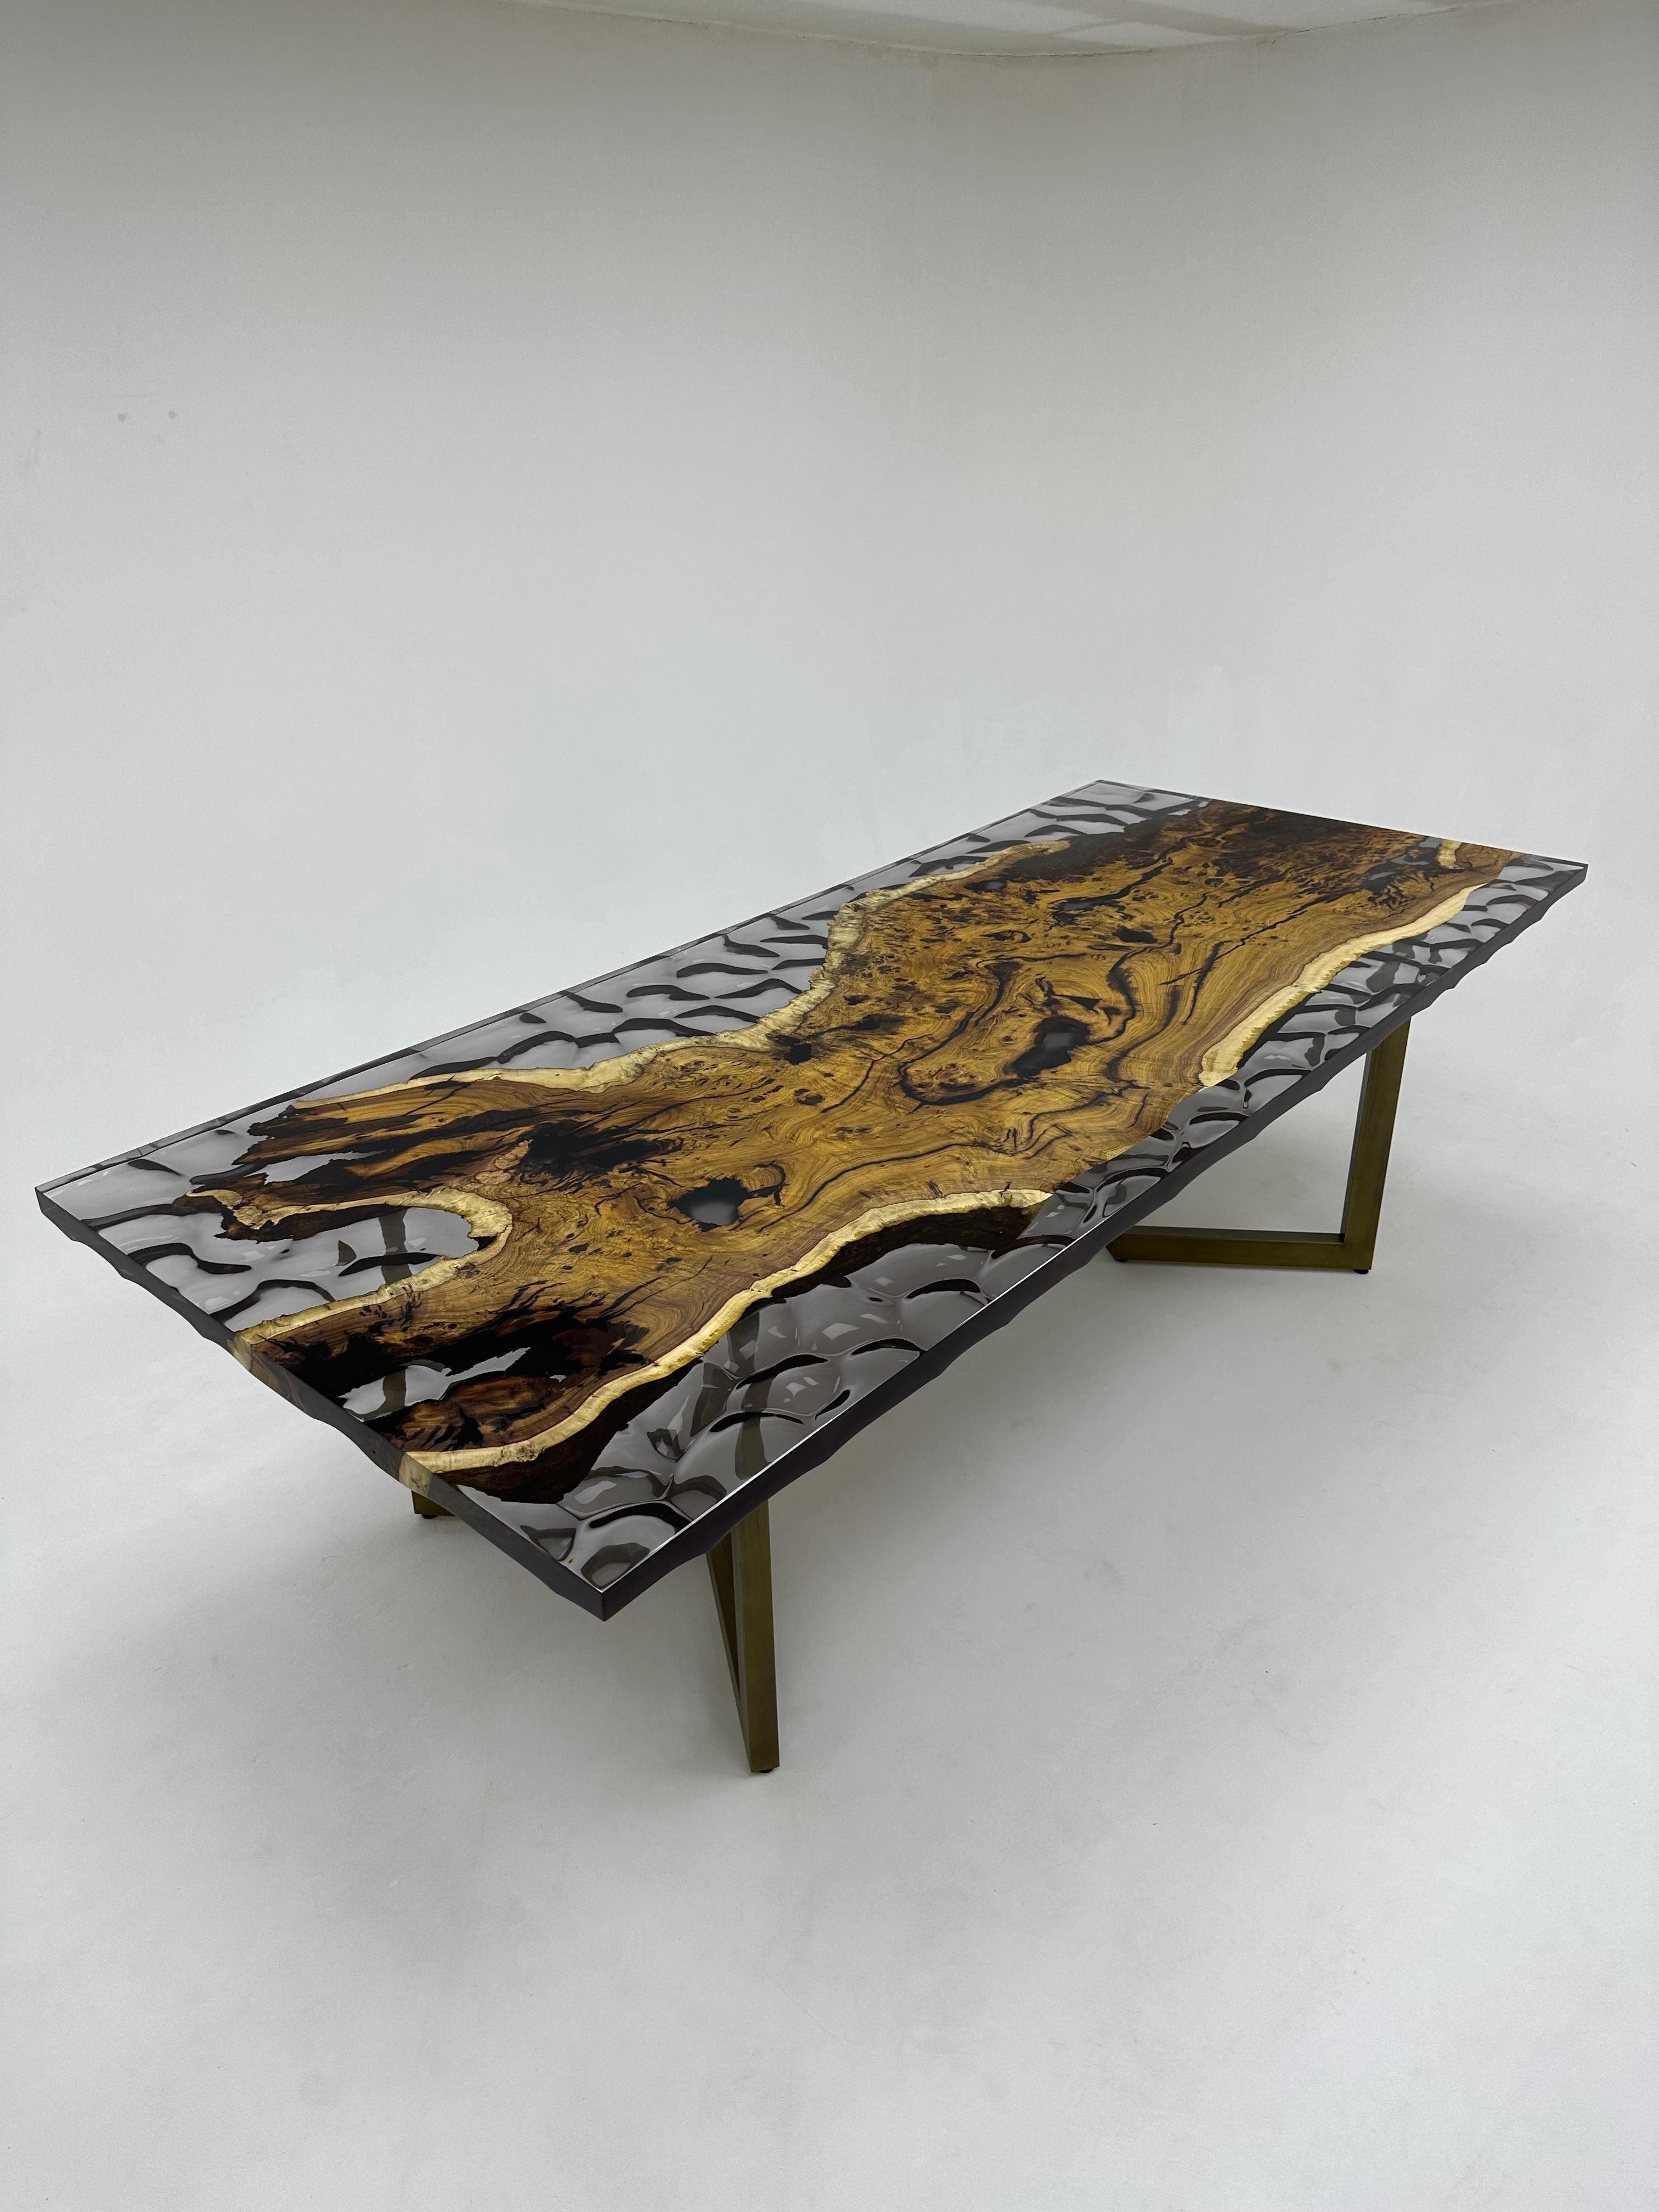 Wave Design Ancient Hackberry Wood Epoxy Resin Table In New Condition For Sale In İnegöl, TR